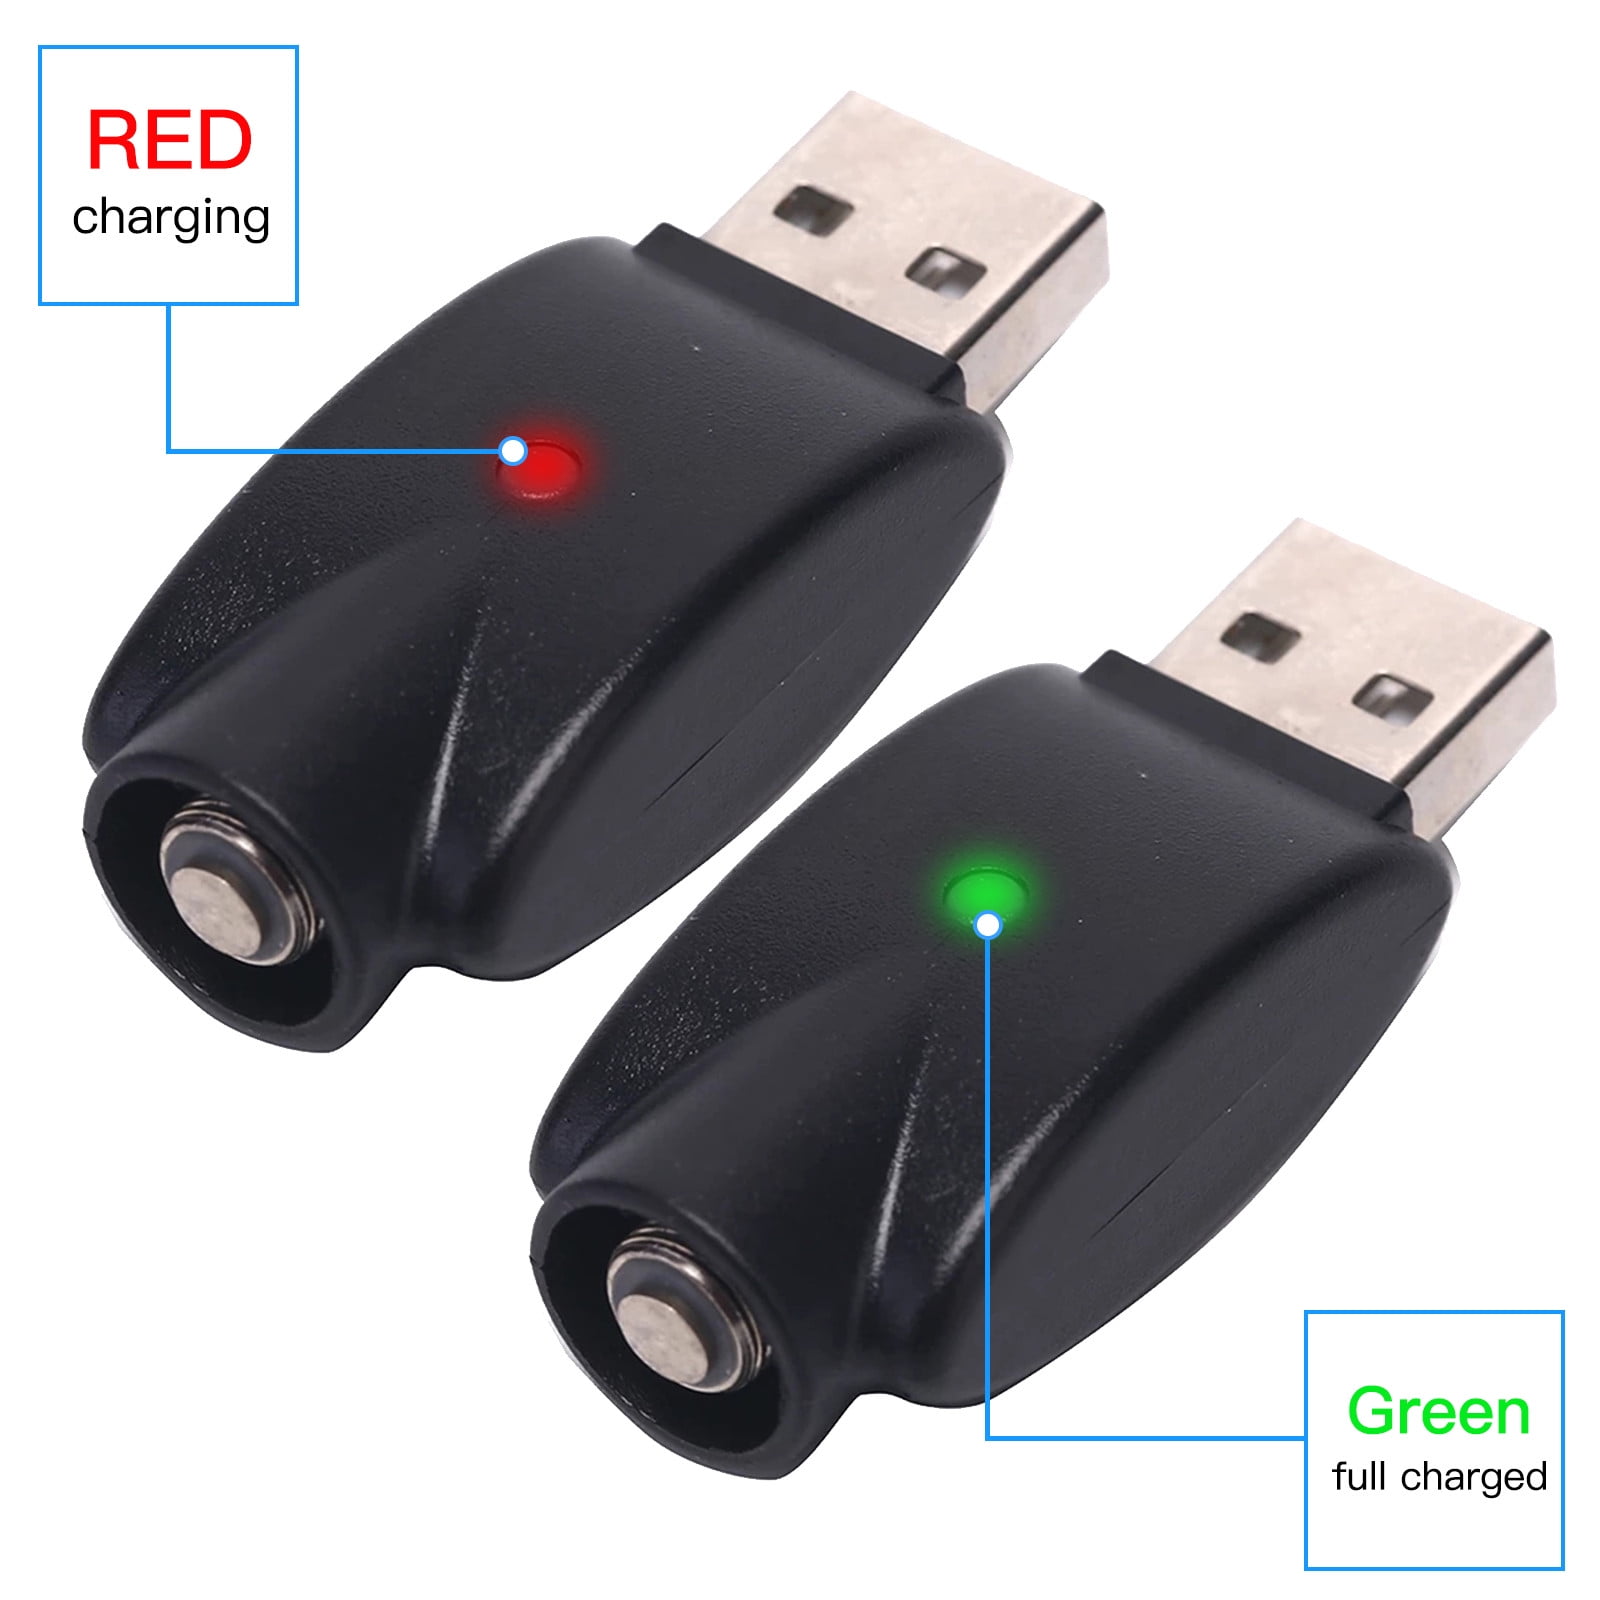 【2-Pack】 Smart Wireless USB Charger USB Thread Cable Rechargeable Overcharge Protection for Adapter Devices with LED Indicators USB Electronic 